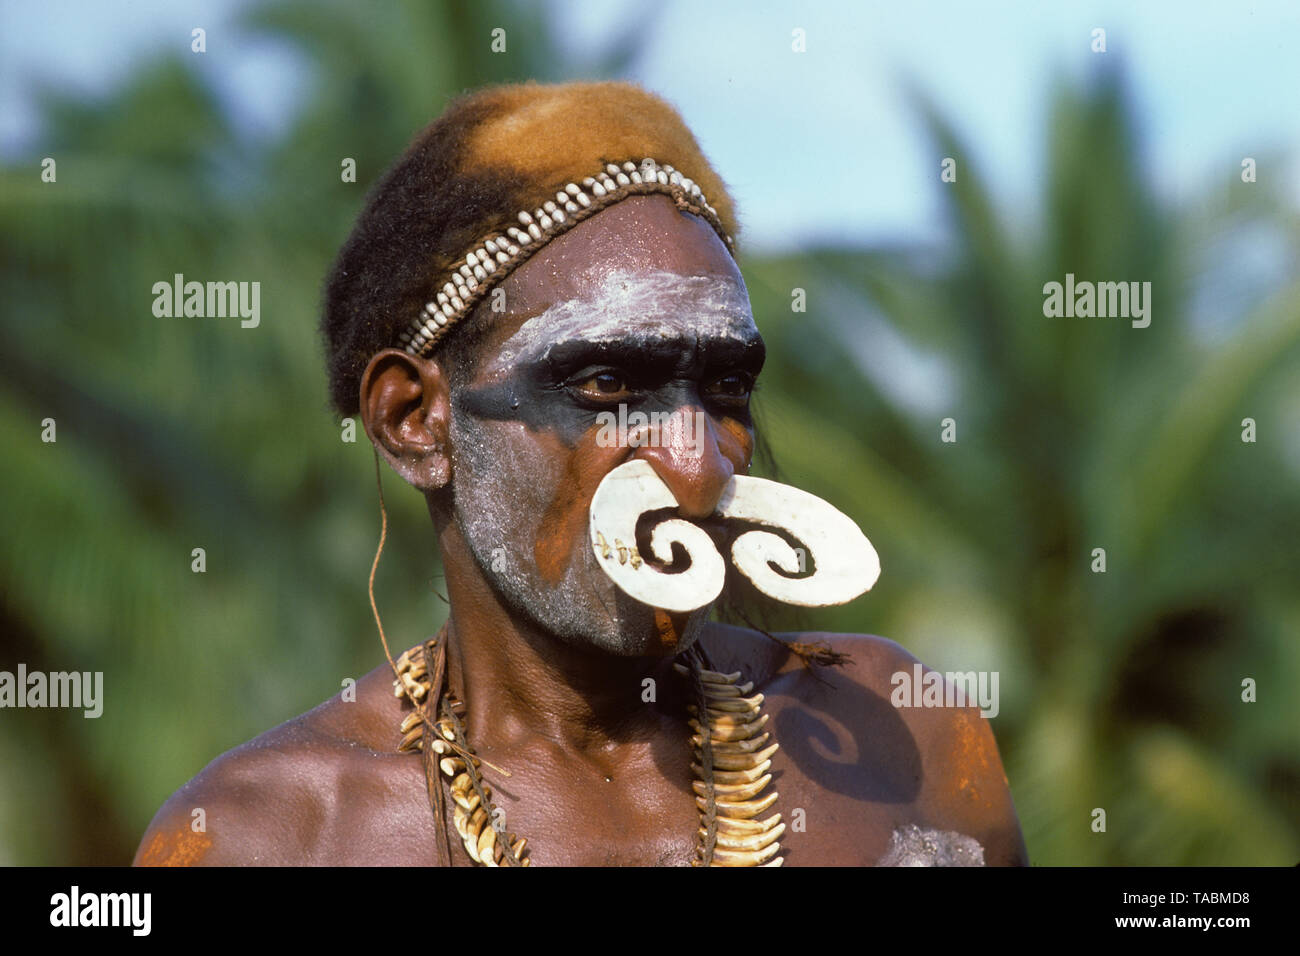 Asmat people: ethnic group living in the Papua province of Indonesia, along the Arafura Sea.  Asmat man, Agats-Sjuru. Photograph taken by Francois Goh Stock Photo